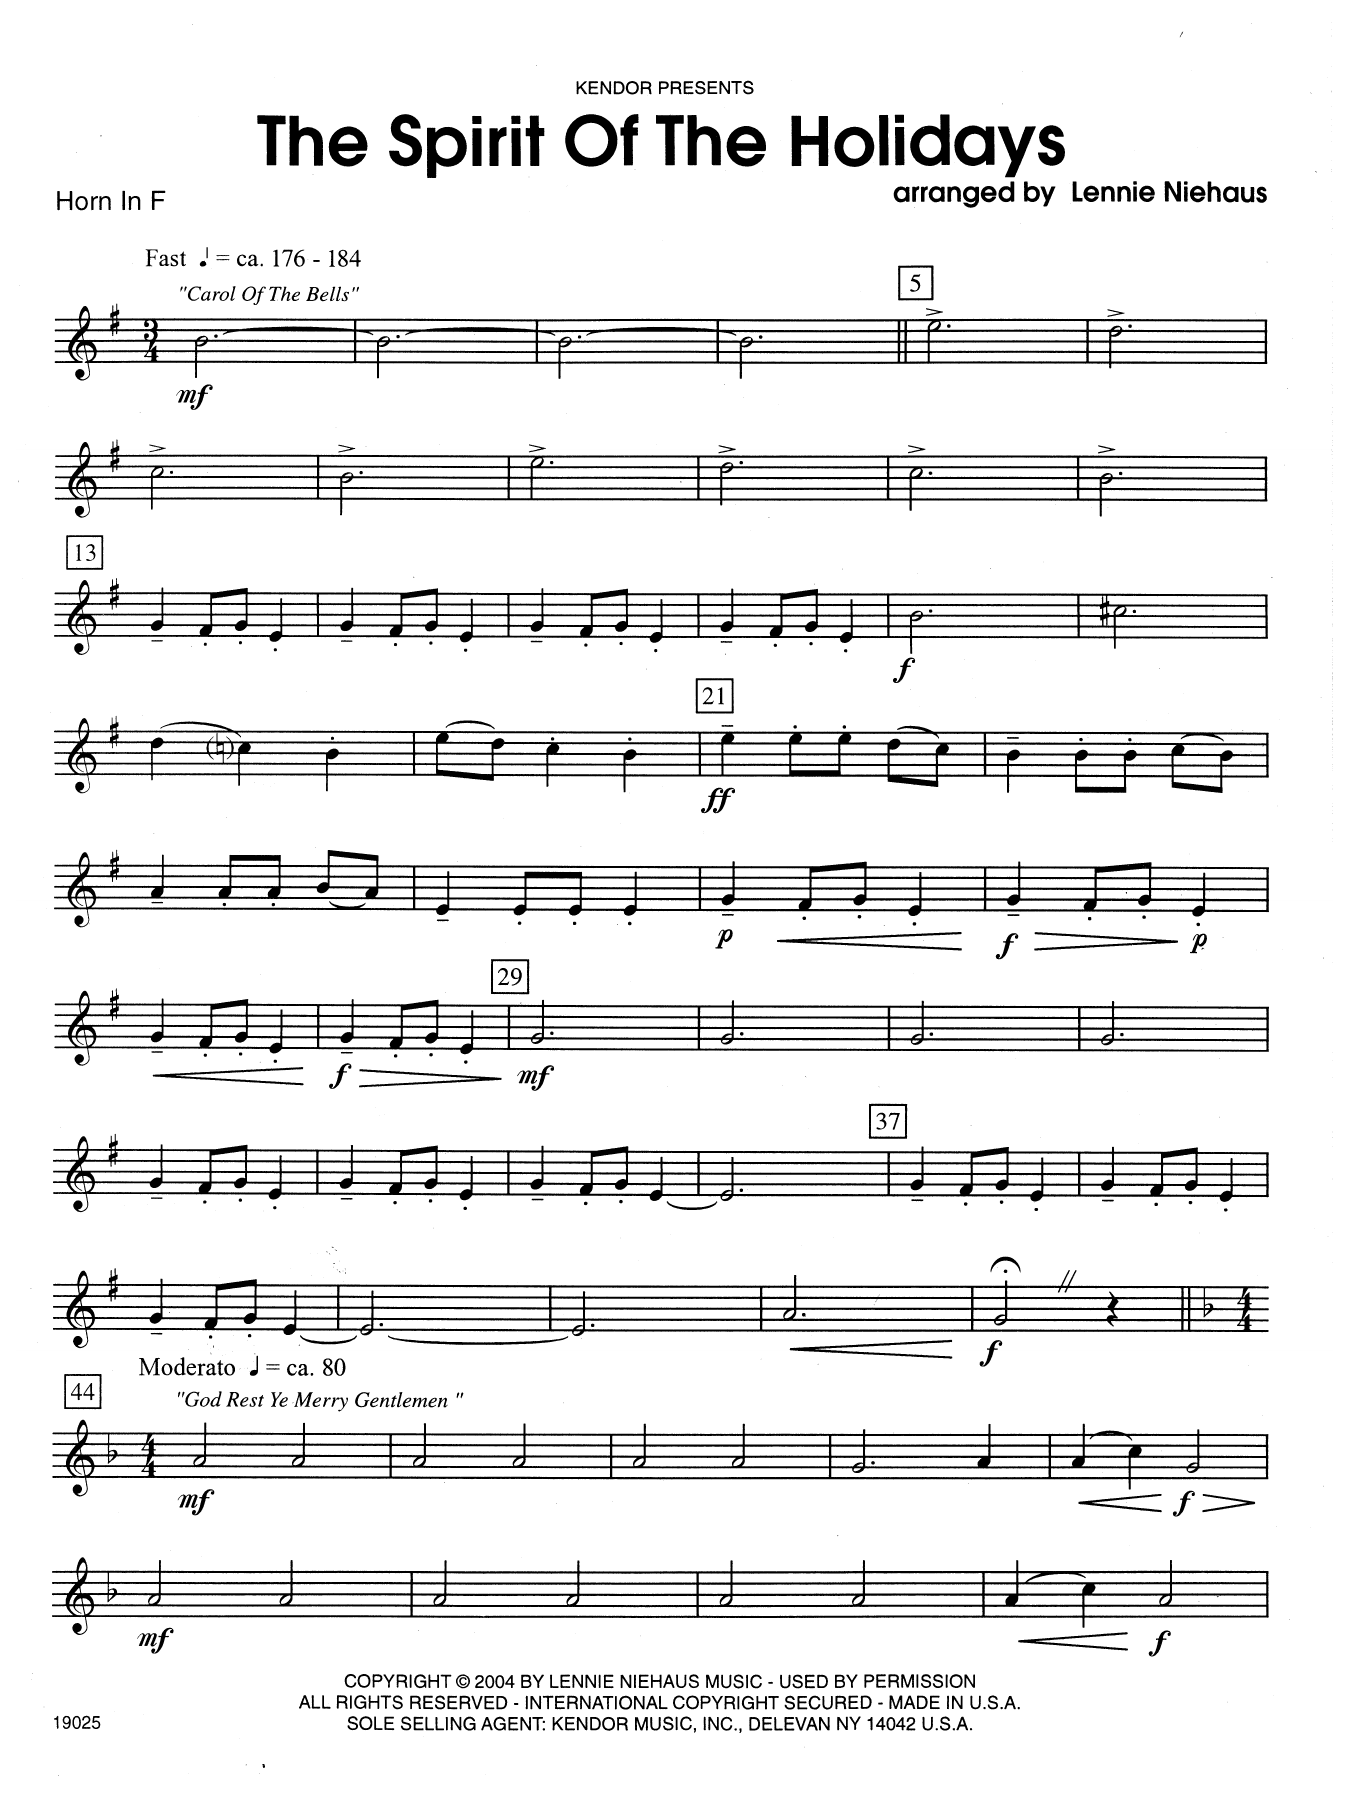 Download Lennie Niehaus The Spirit Of The Holidays - Horn in F Sheet Music